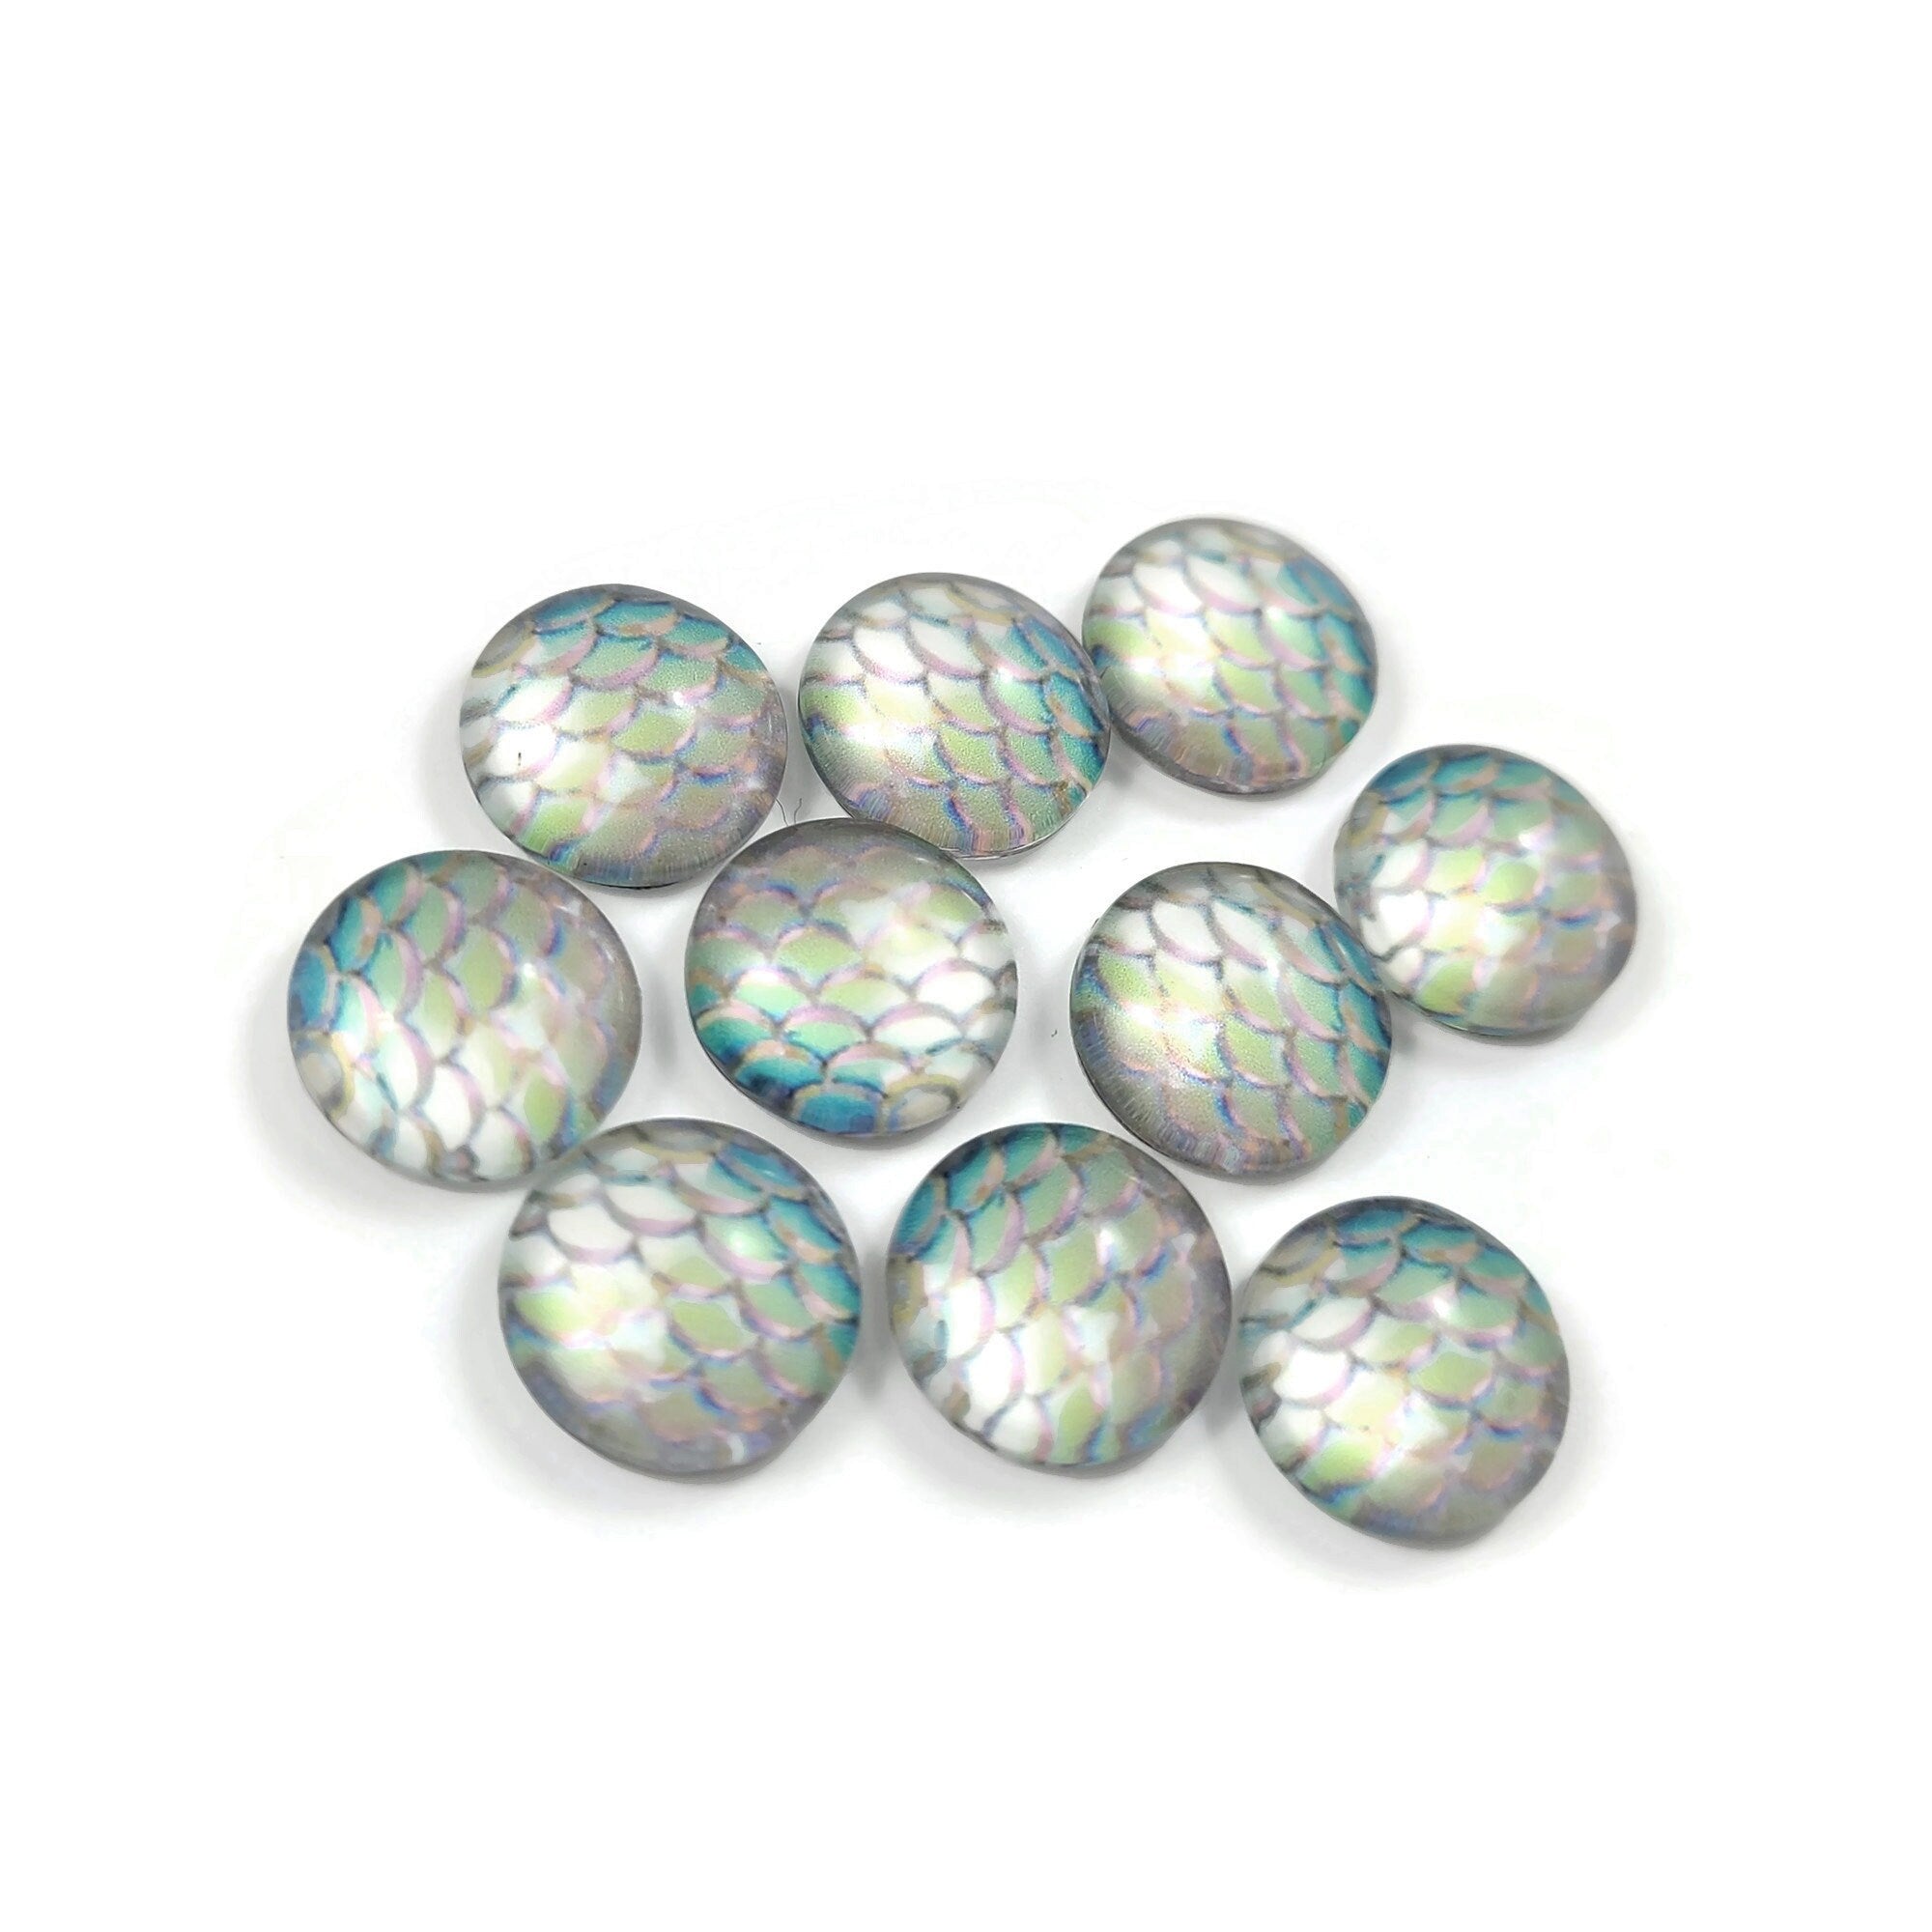 Mermaid glass cabochons, 12mm flat round domed cabochons, Set of 10, Jewelry making